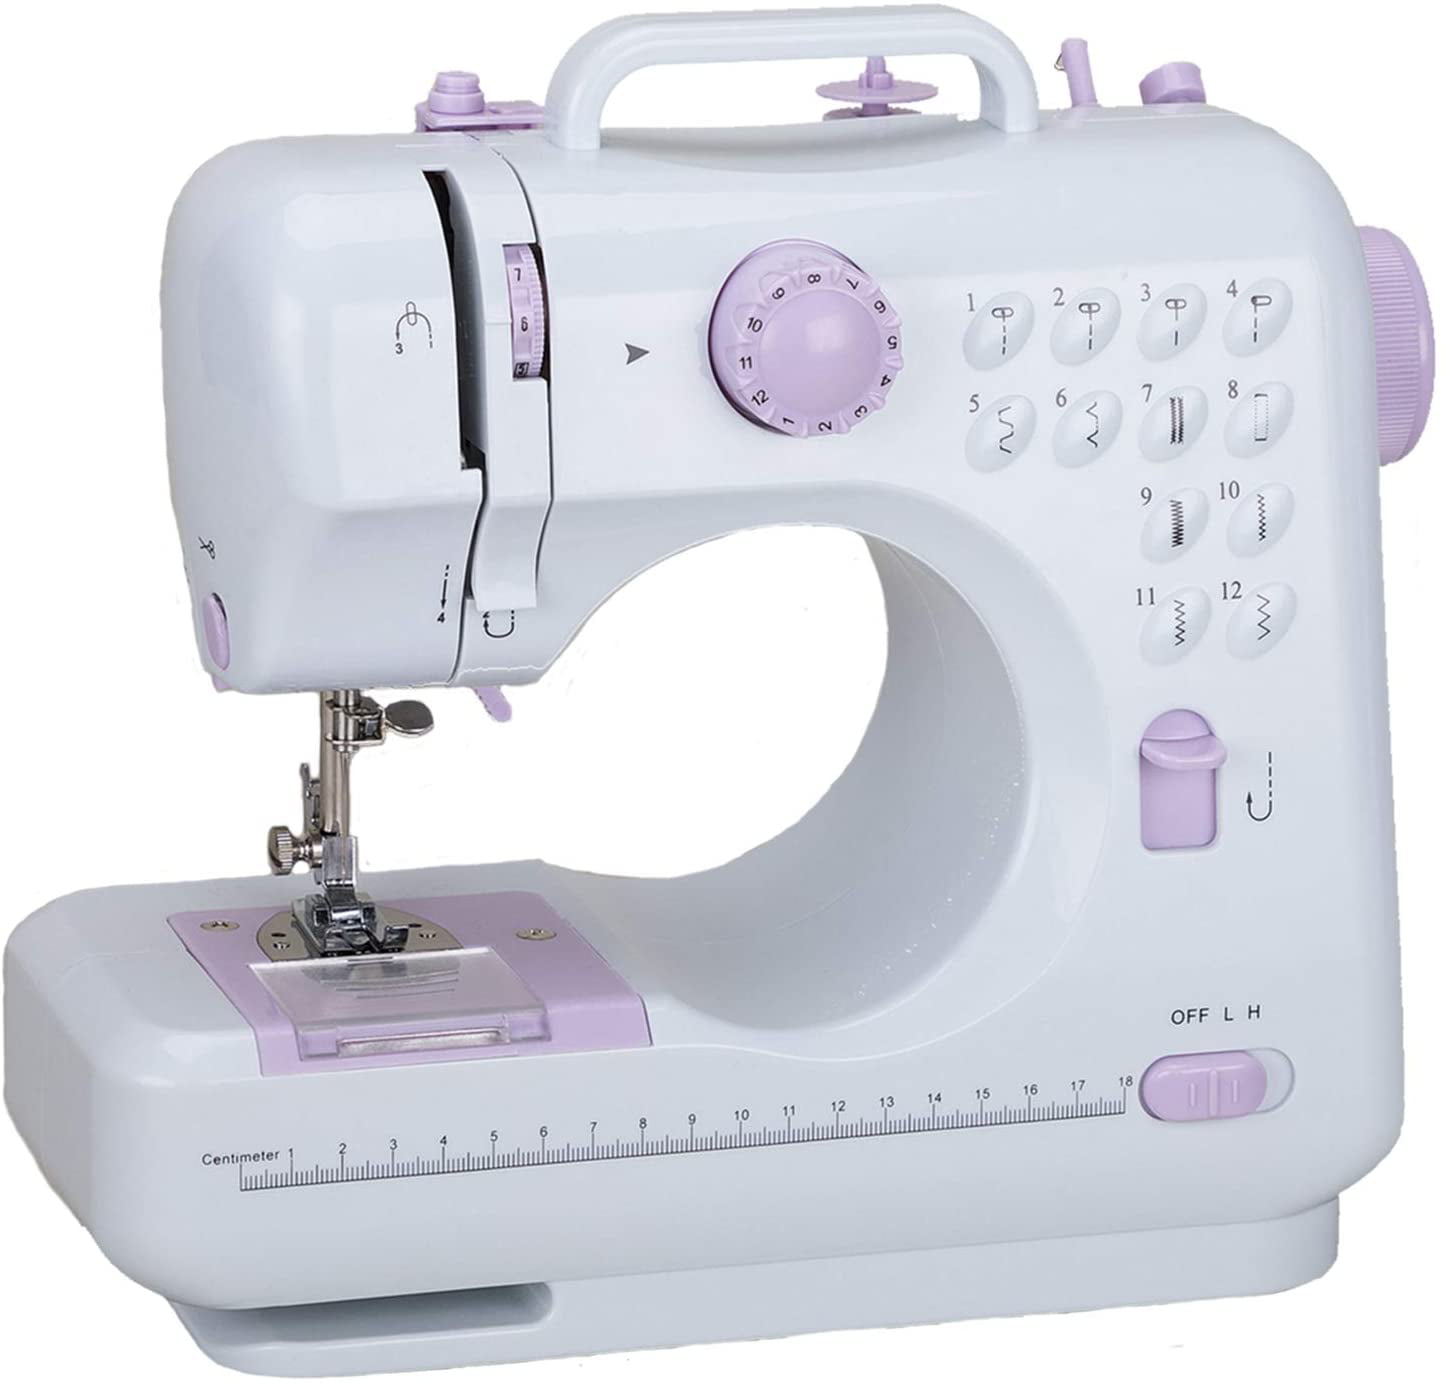 Multi-functional Electric Sewing Machine，12 Stitch Portable Mini Sewing